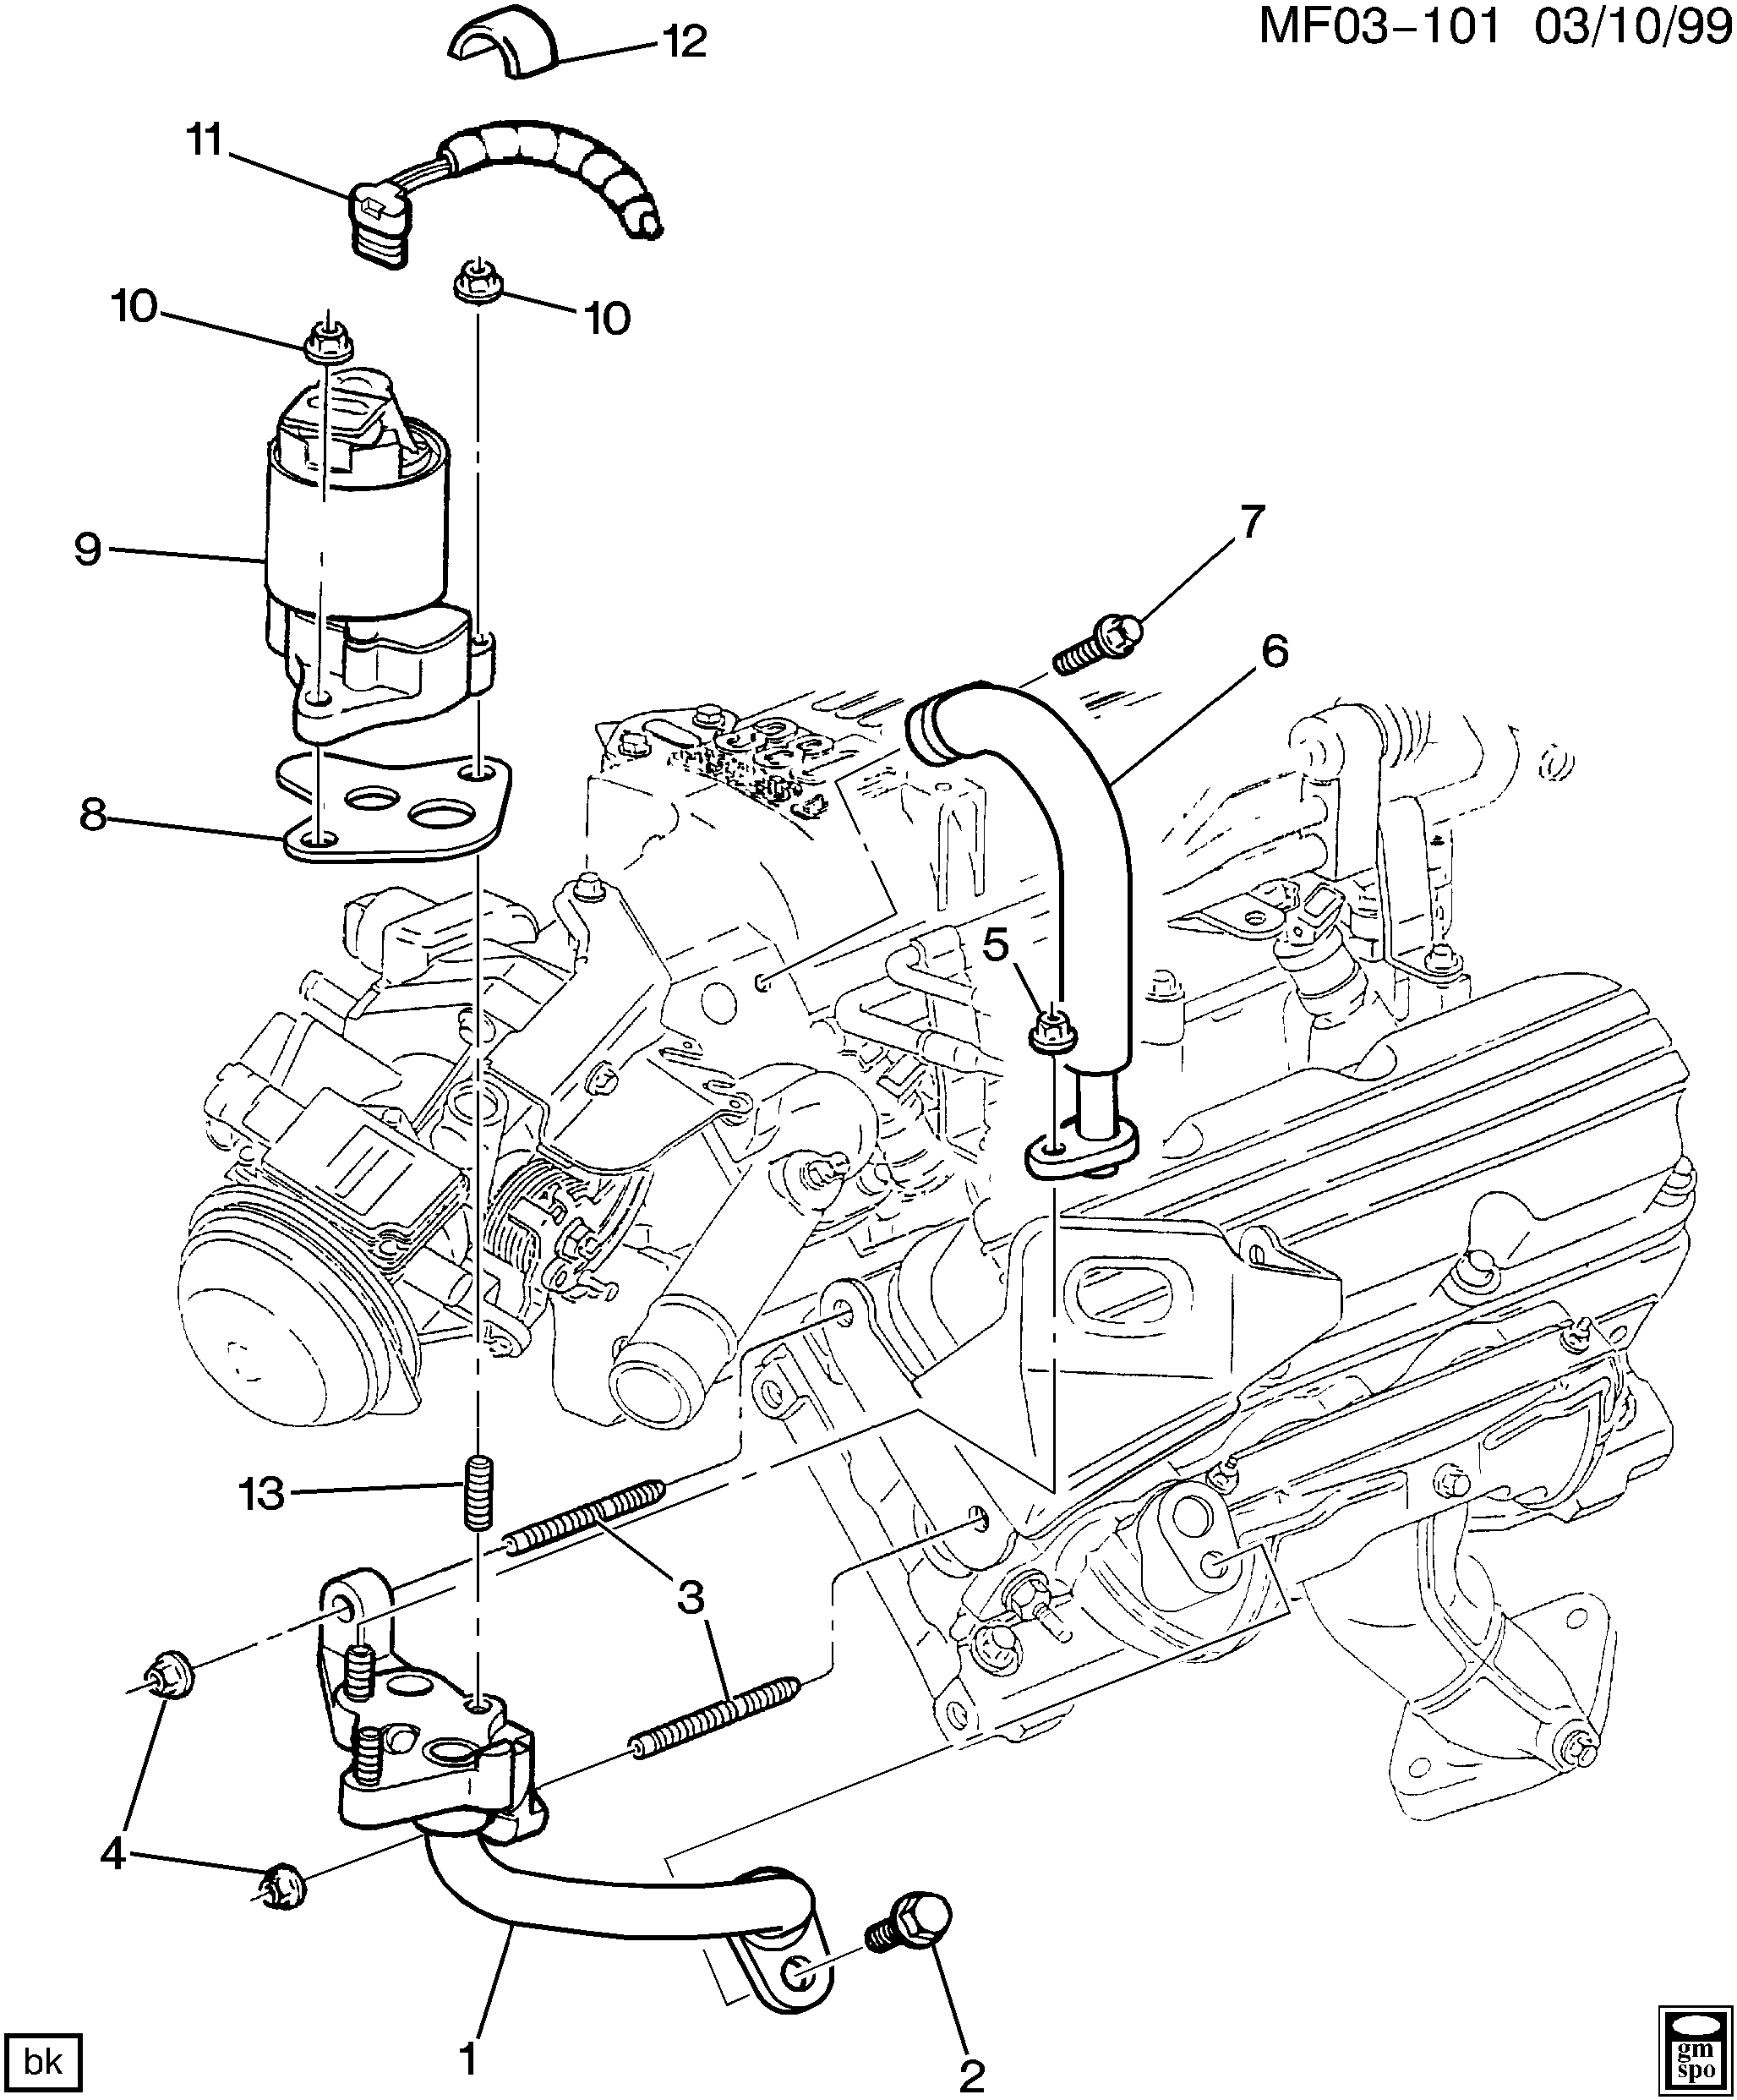 1995-2002 F E.G.R. VALVE & RELATED PARTS (L36/3.8K)